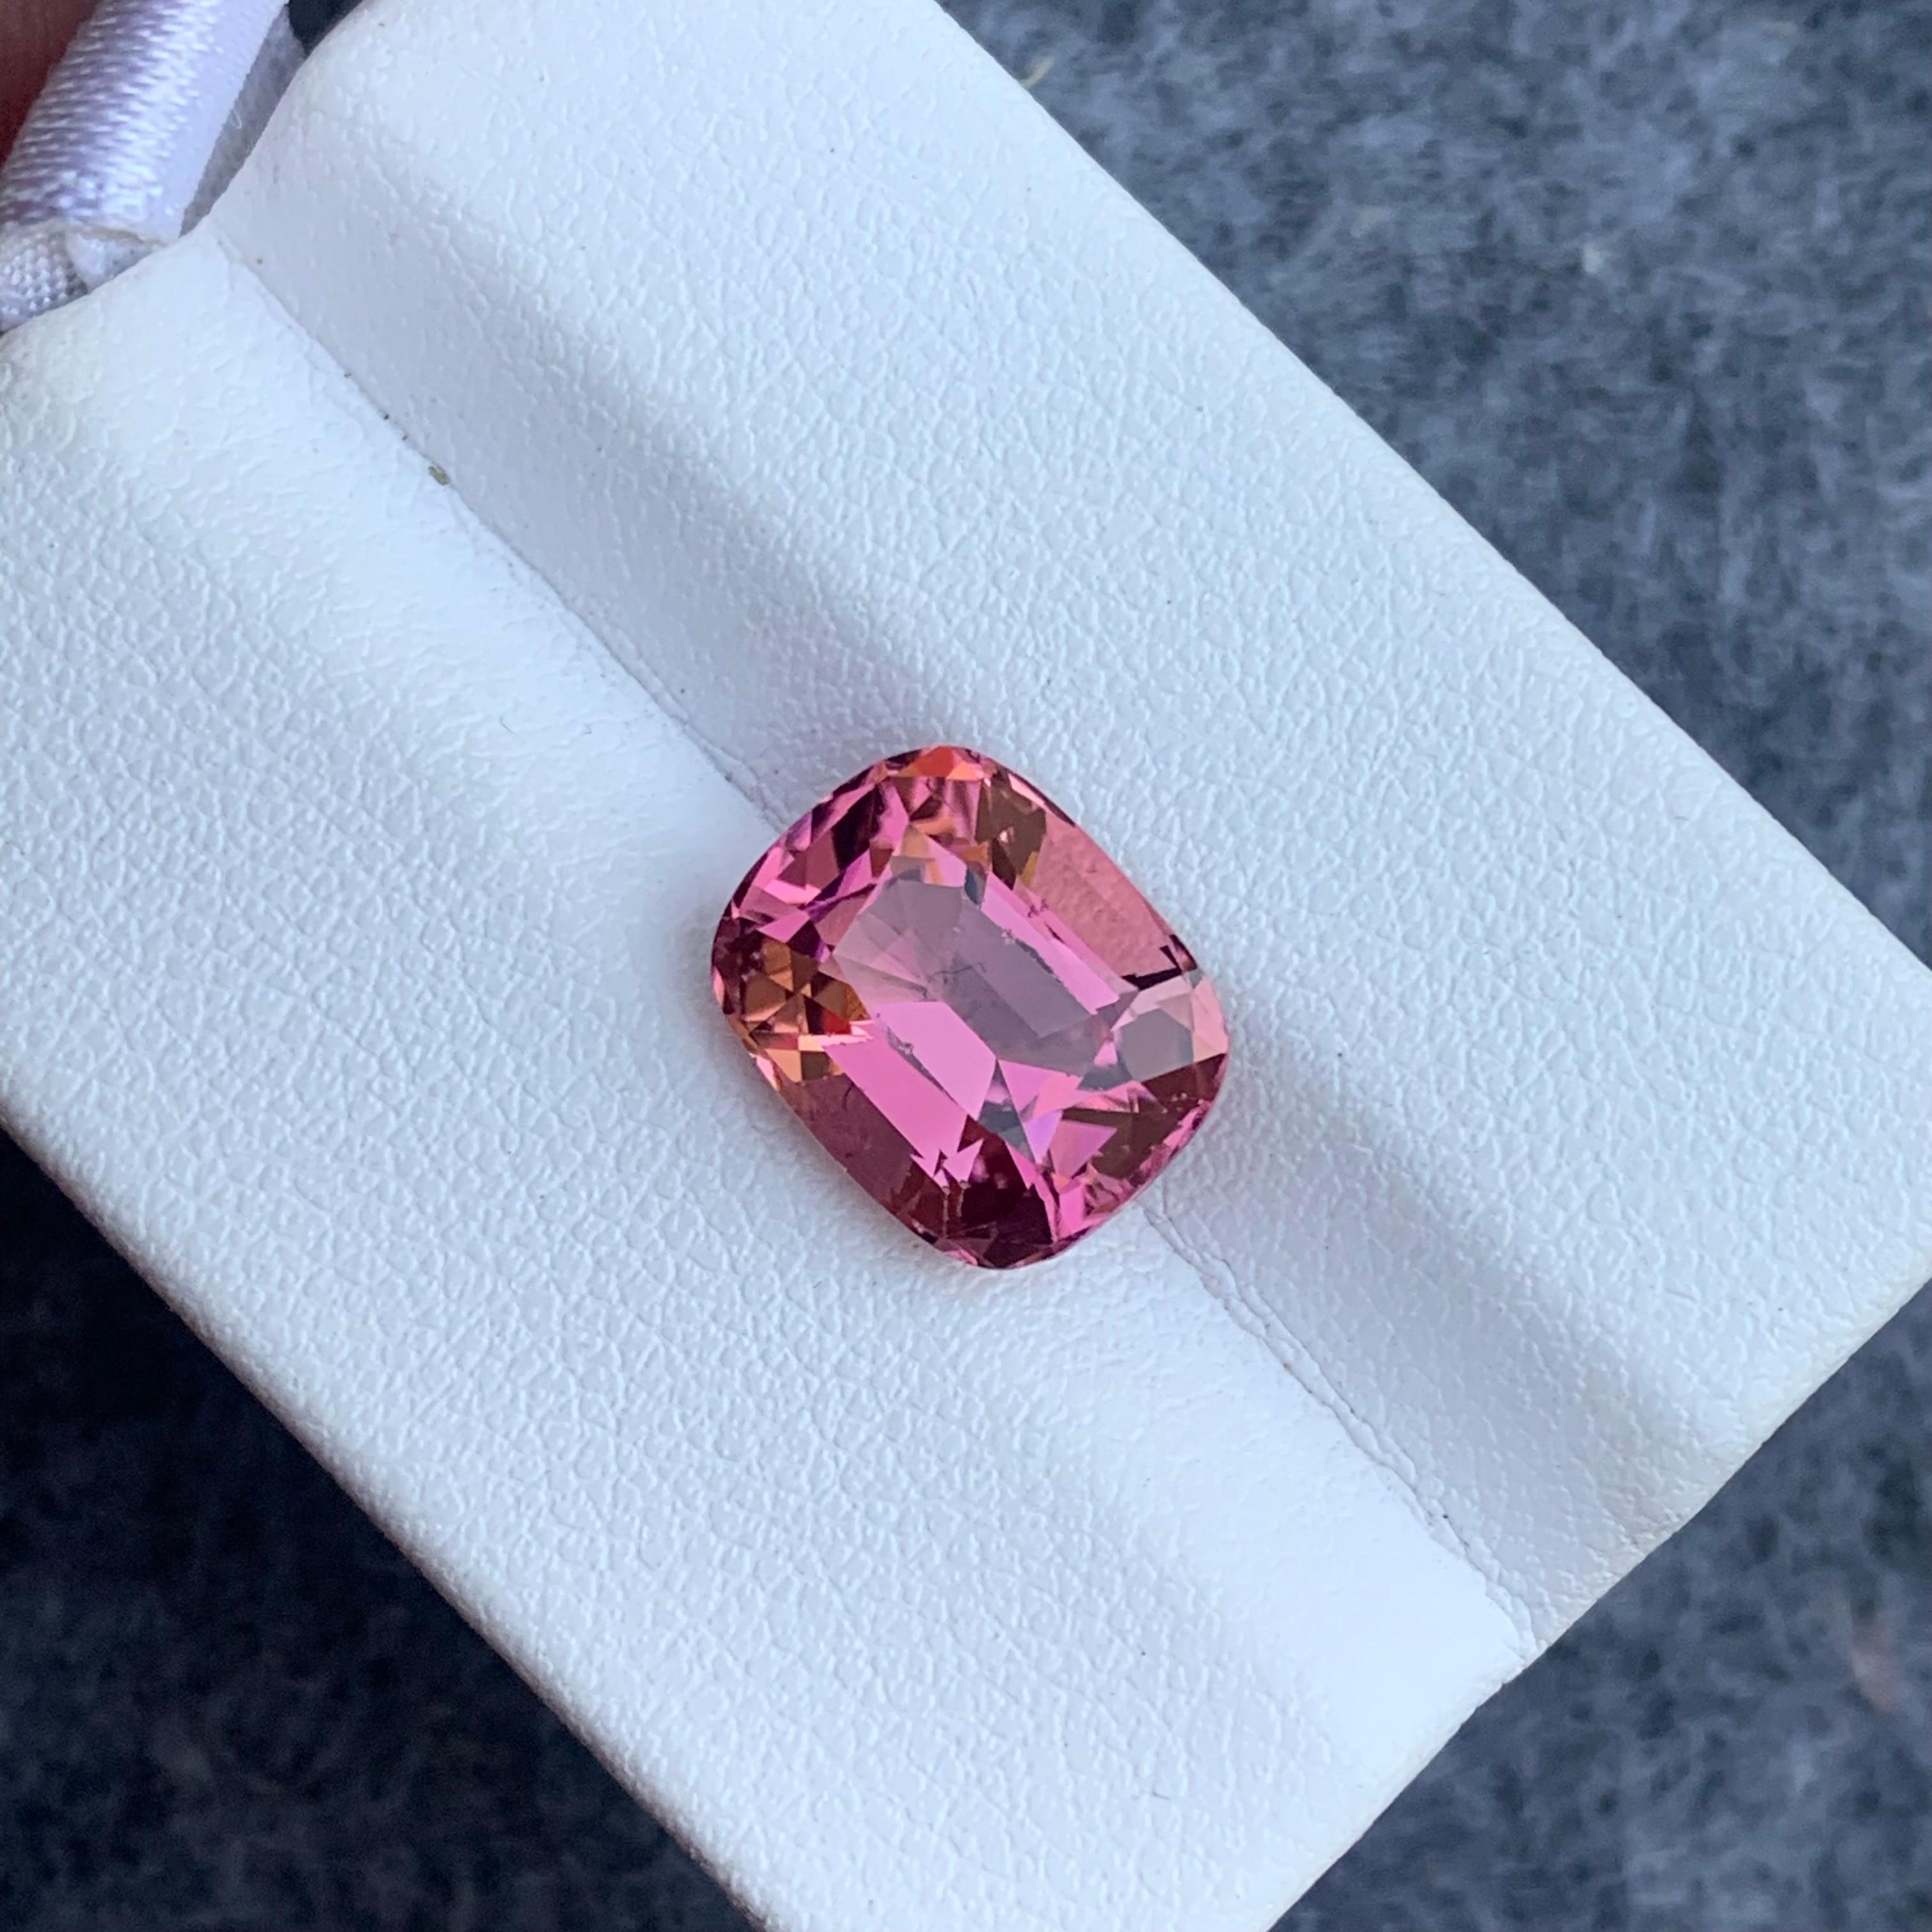 Arts and Crafts 4.90 Carat Loose Pink Tourmaline Cushion Cut Gemstone for Jewelry Making For Sale